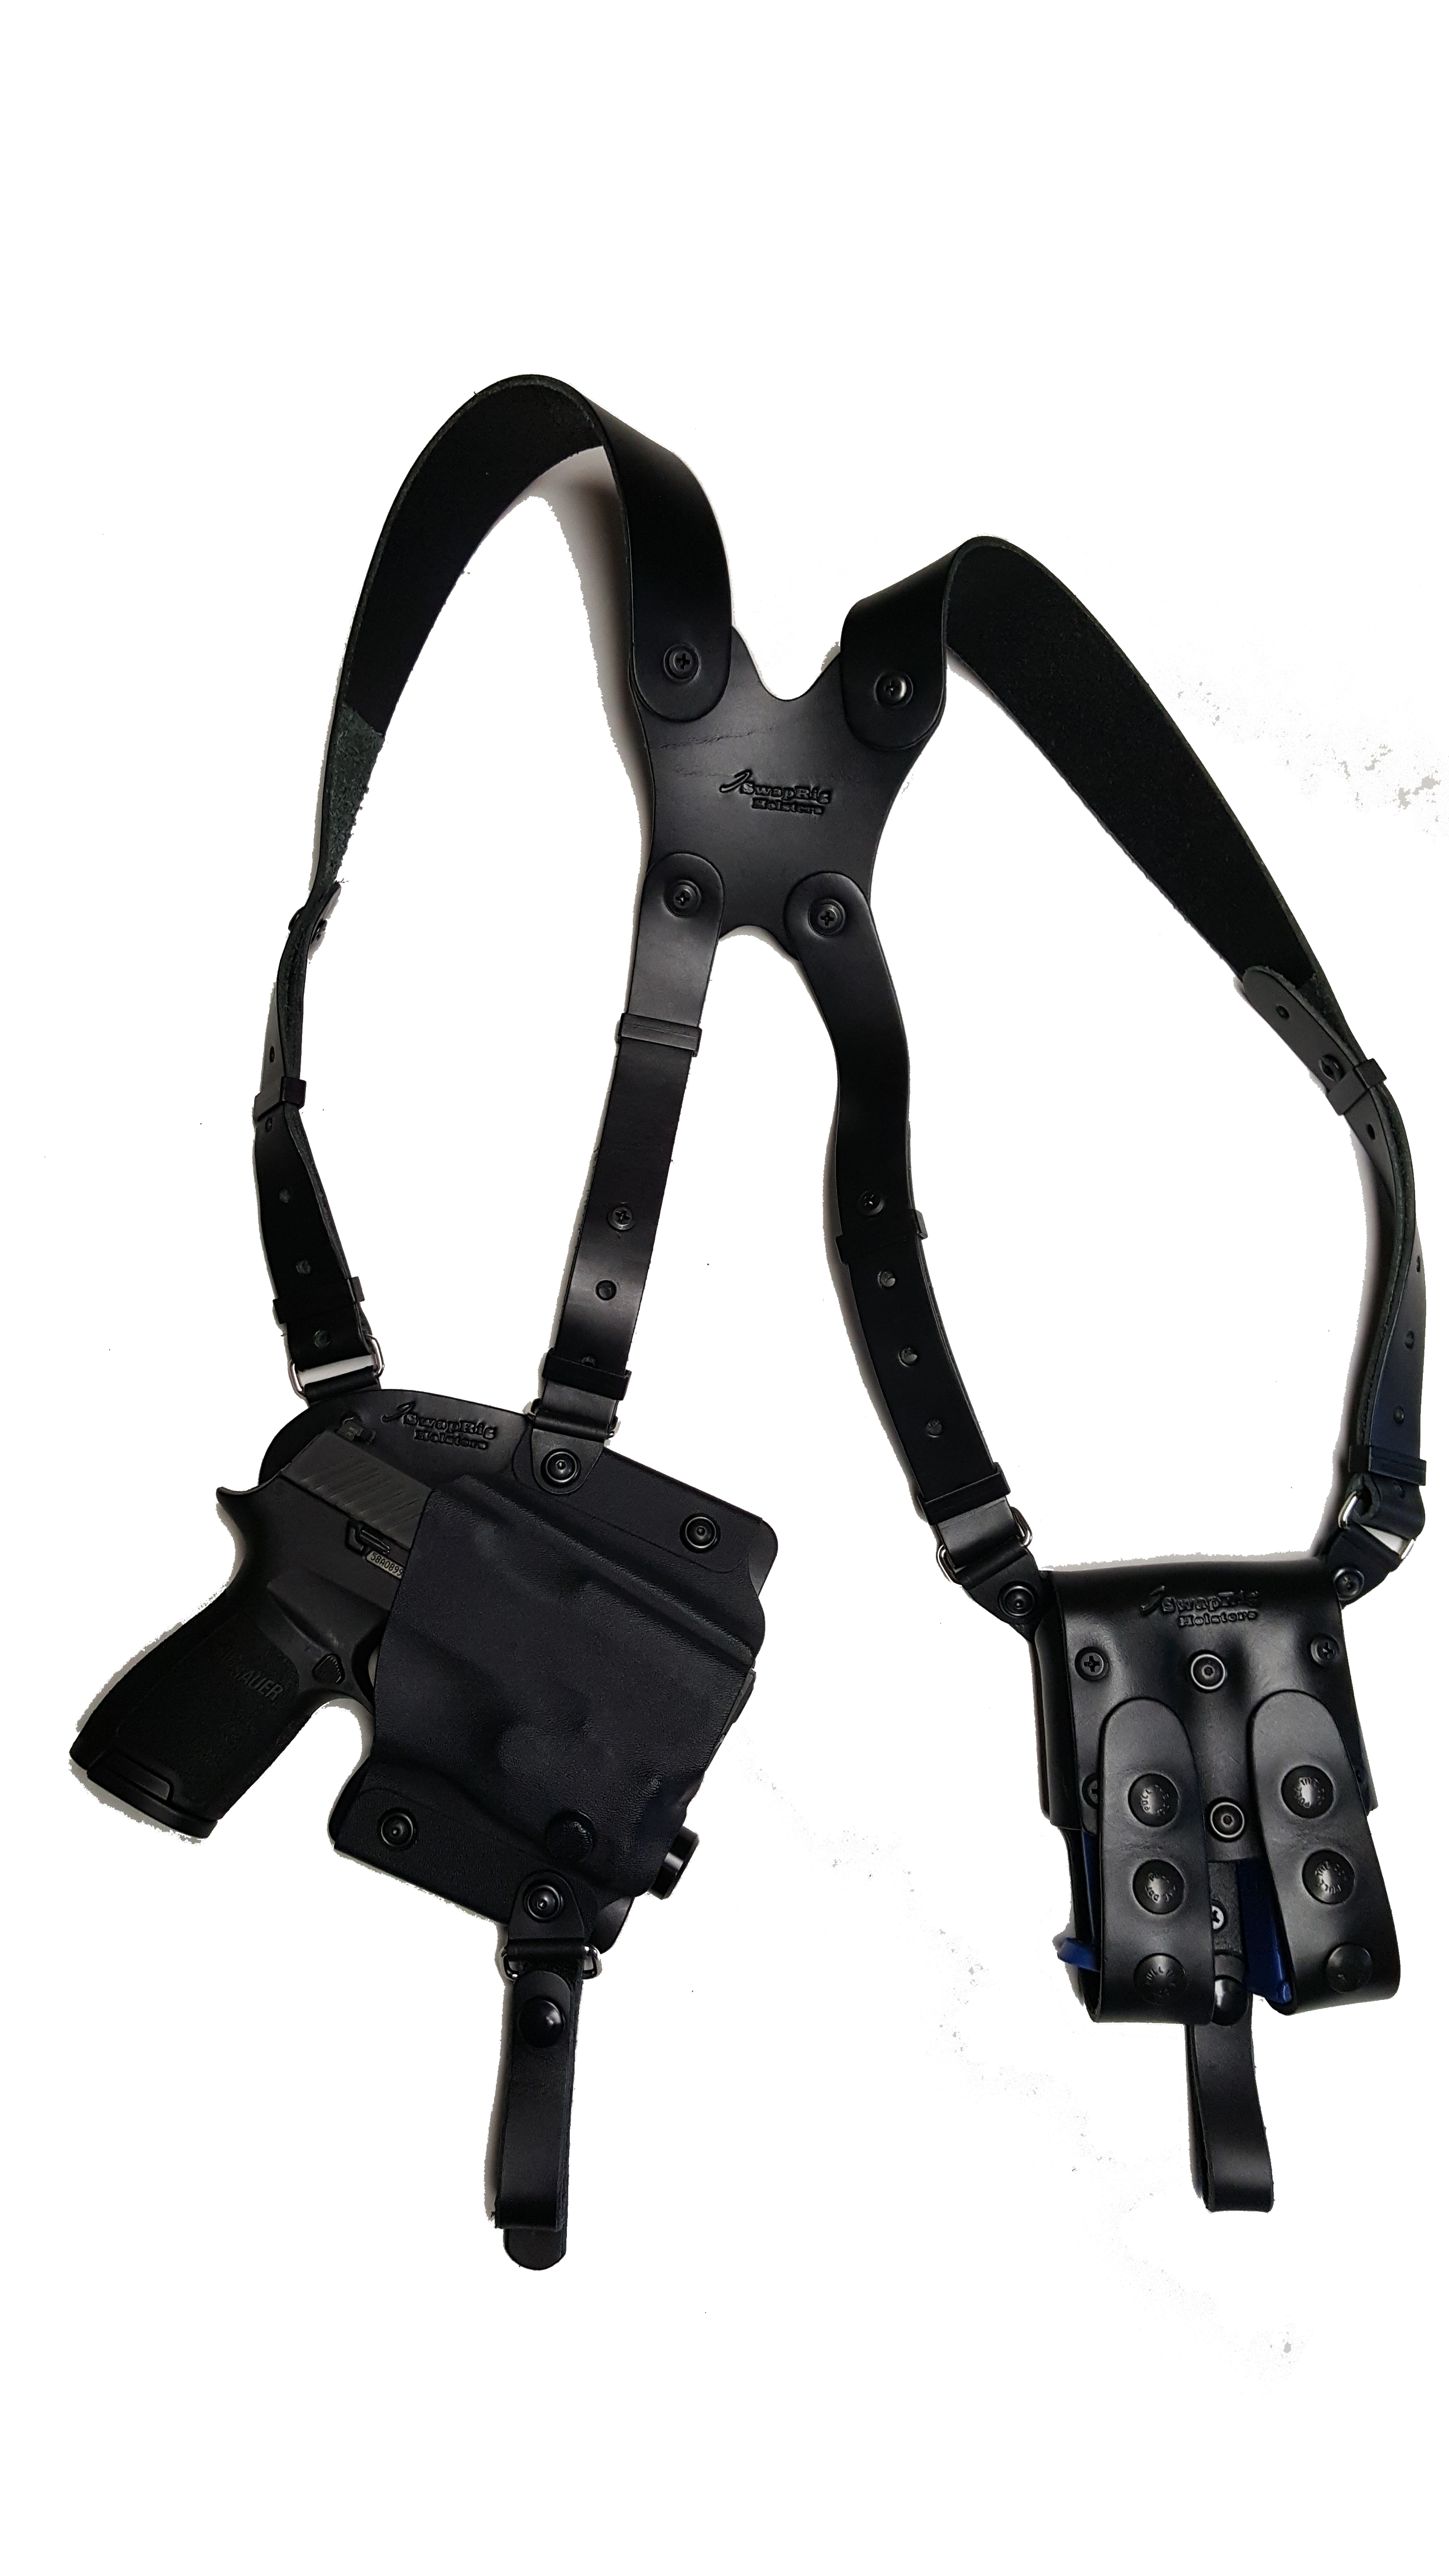 G2S Double Magazine G2C Leather Shoulder Holster for Taurus G2 PT111 Brown or Black Horizontal Posture Genuine Leather 